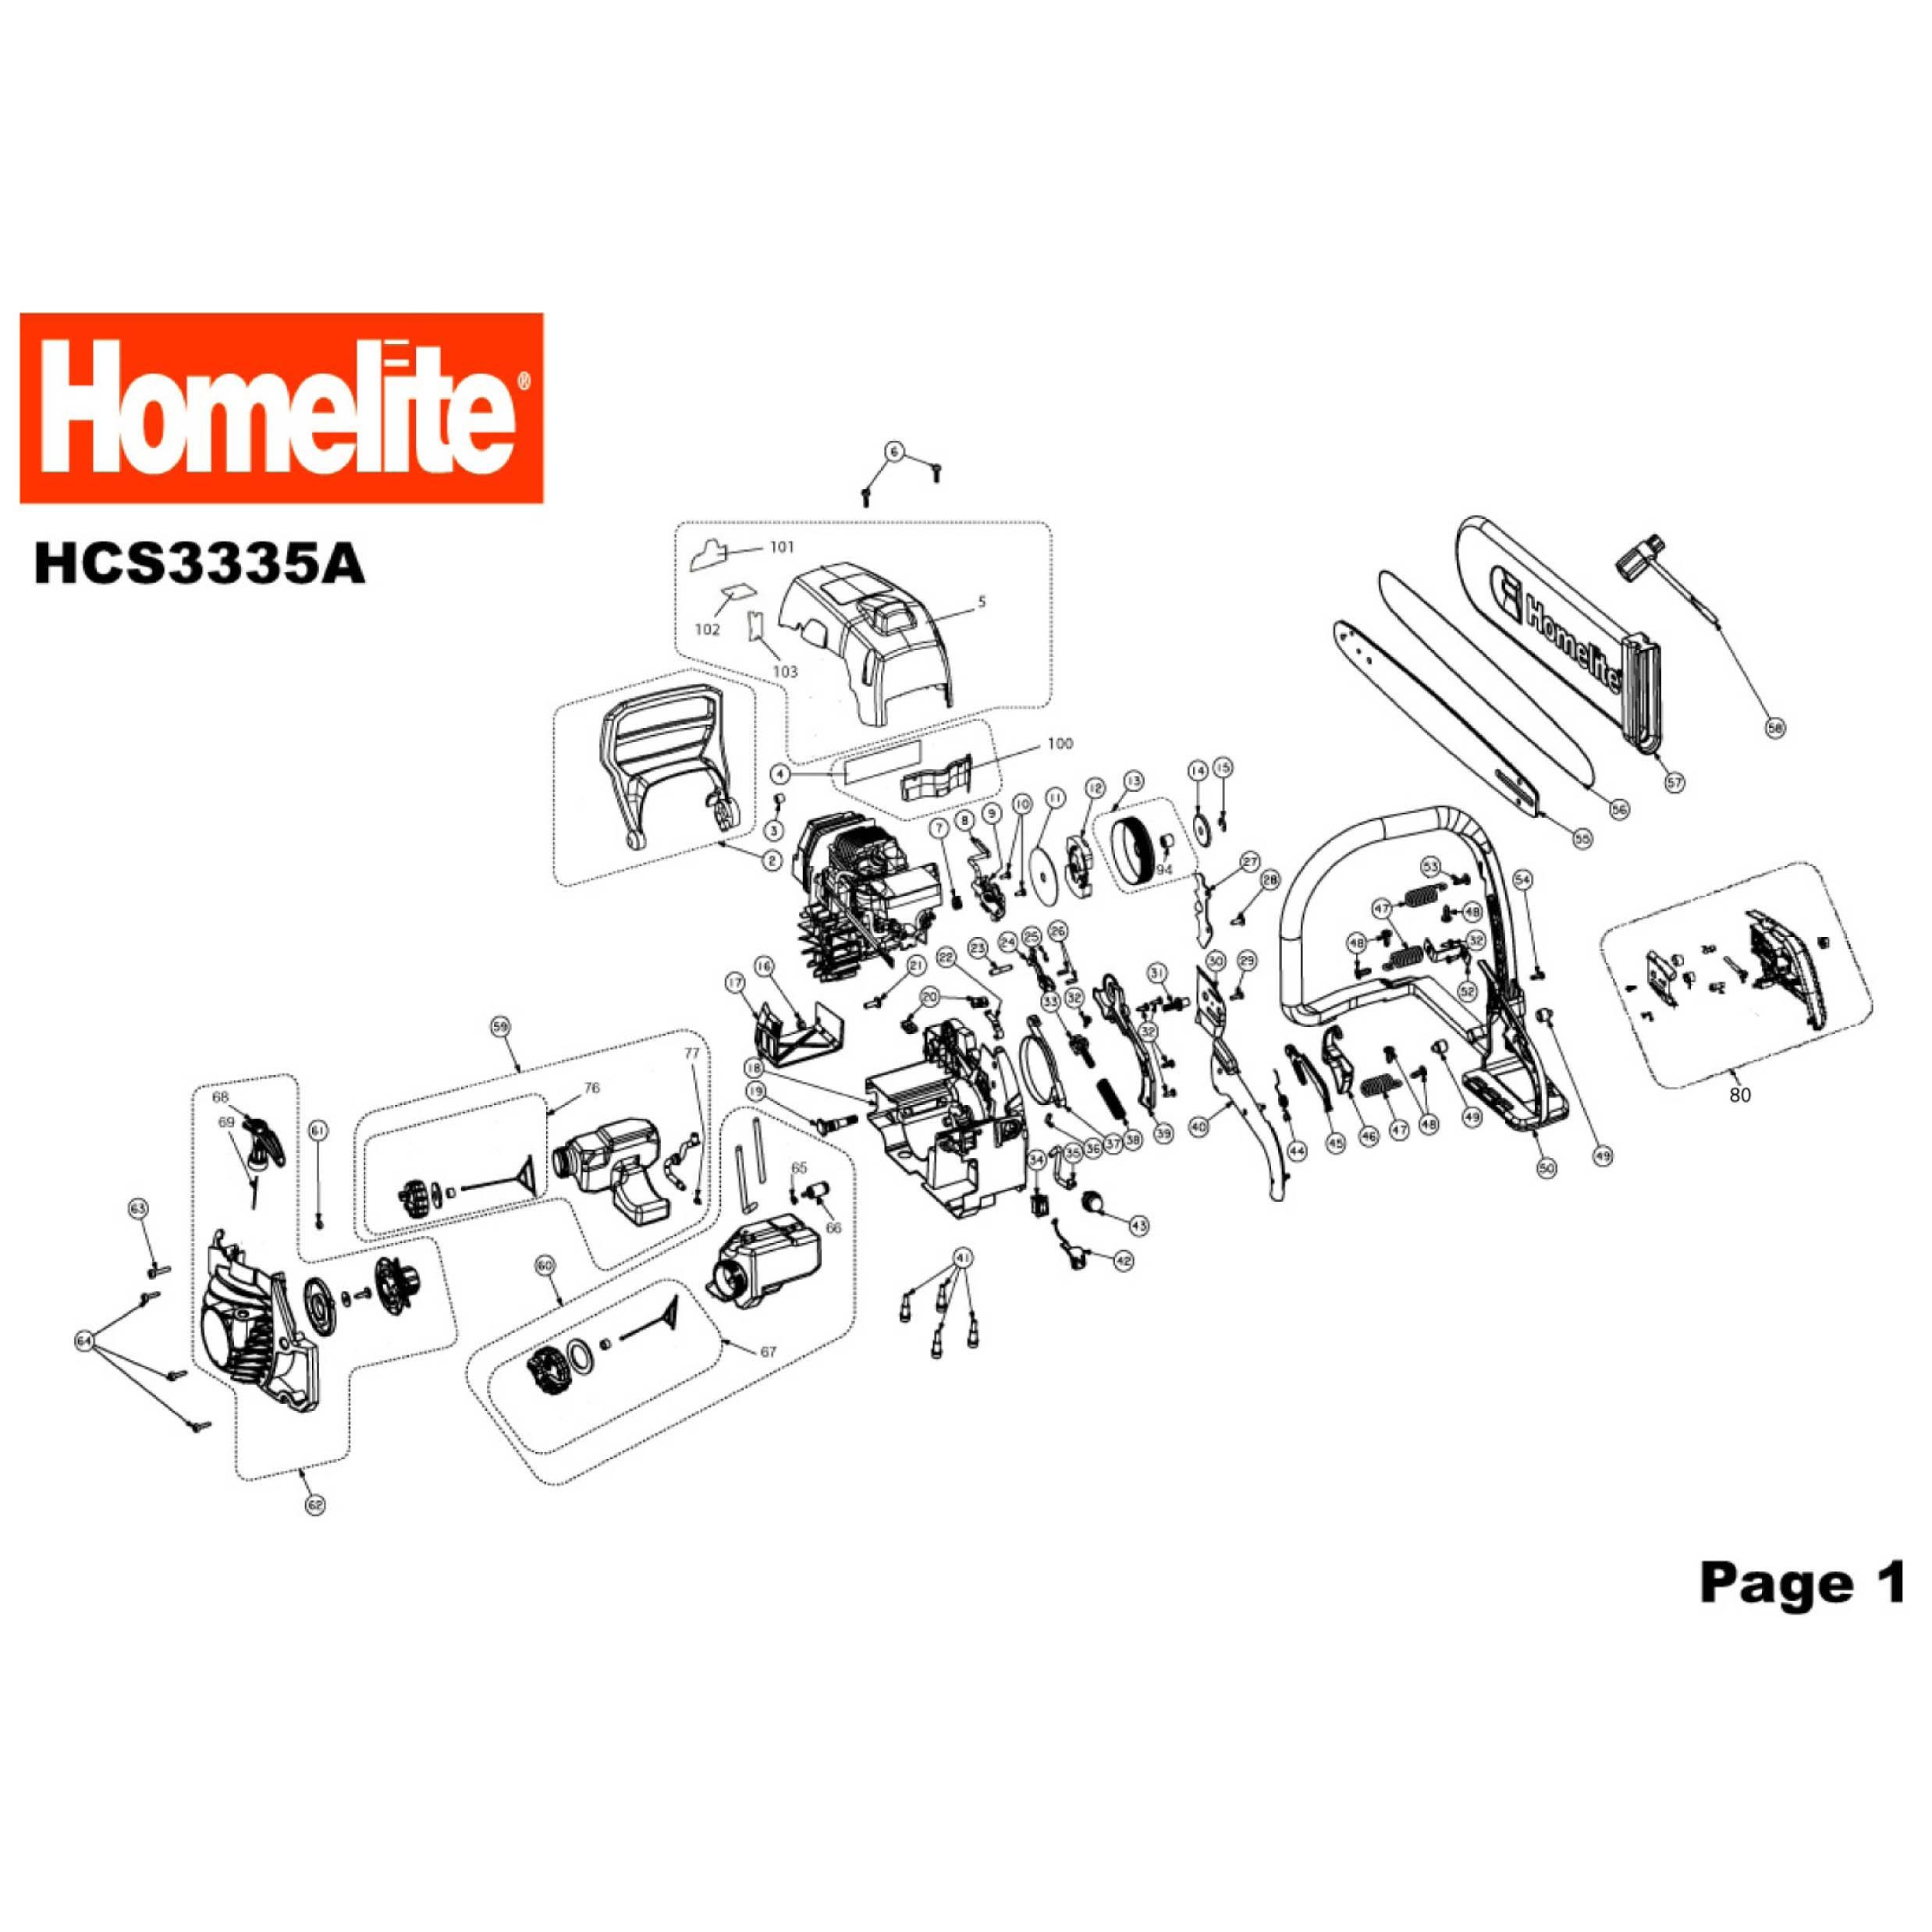 Homelite Chainsaw Wiring Diagram Homelite Hcs3335a Exploded Diagram Of Chainsaw with Components Of Homelite Chainsaw Wiring Diagram